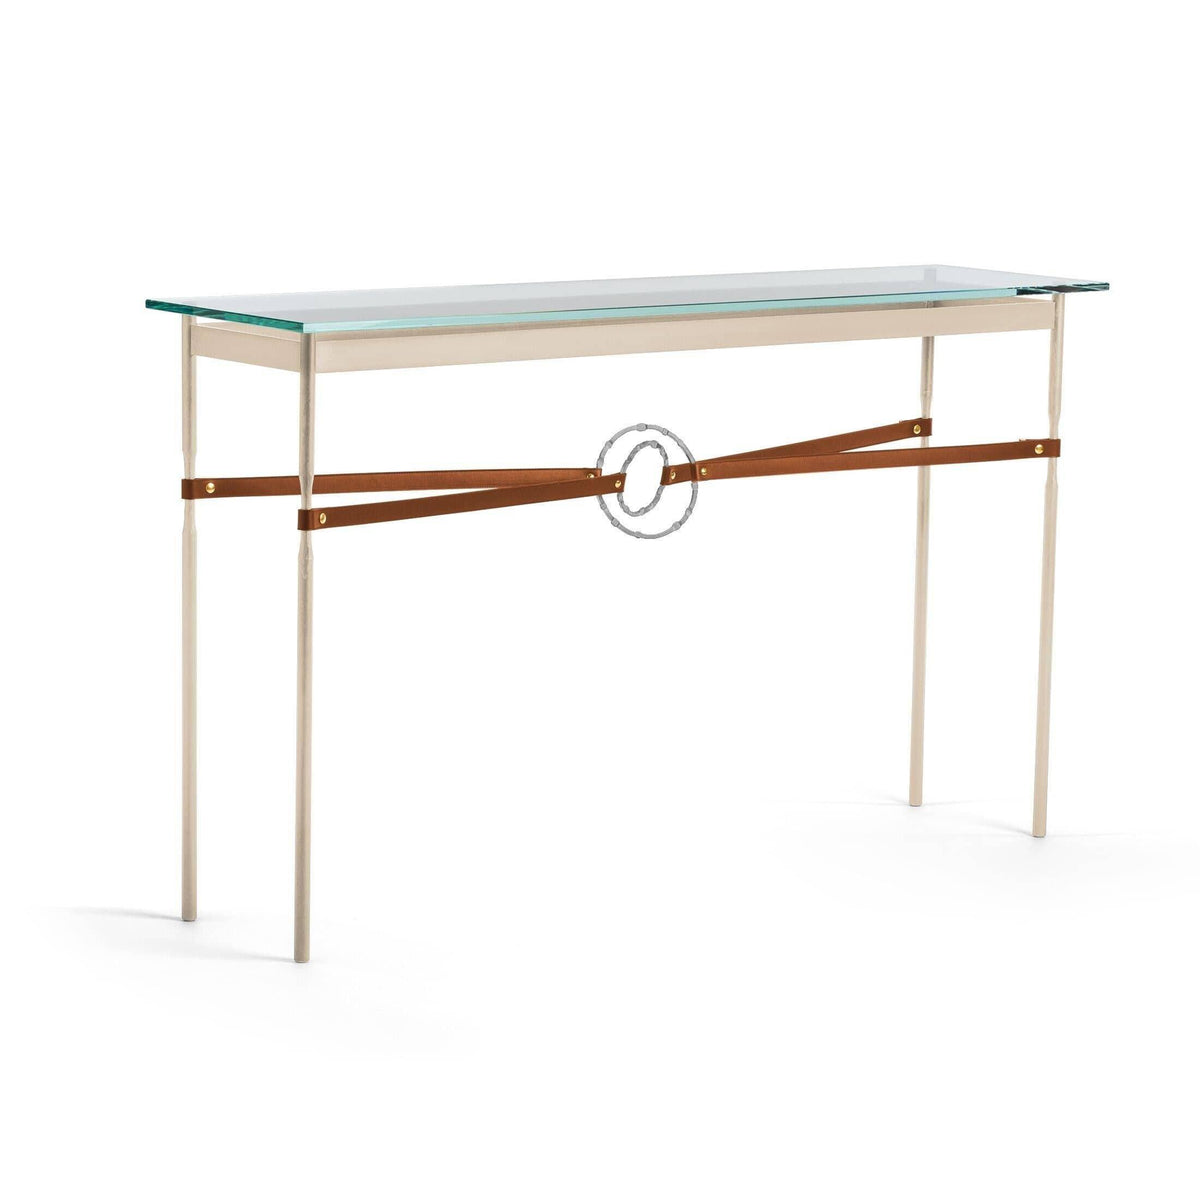 Hubbardton Forge - Equus Chestnut Leather Console Table - 750118-84-82-LC-VA0714 | Montreal Lighting & Hardware